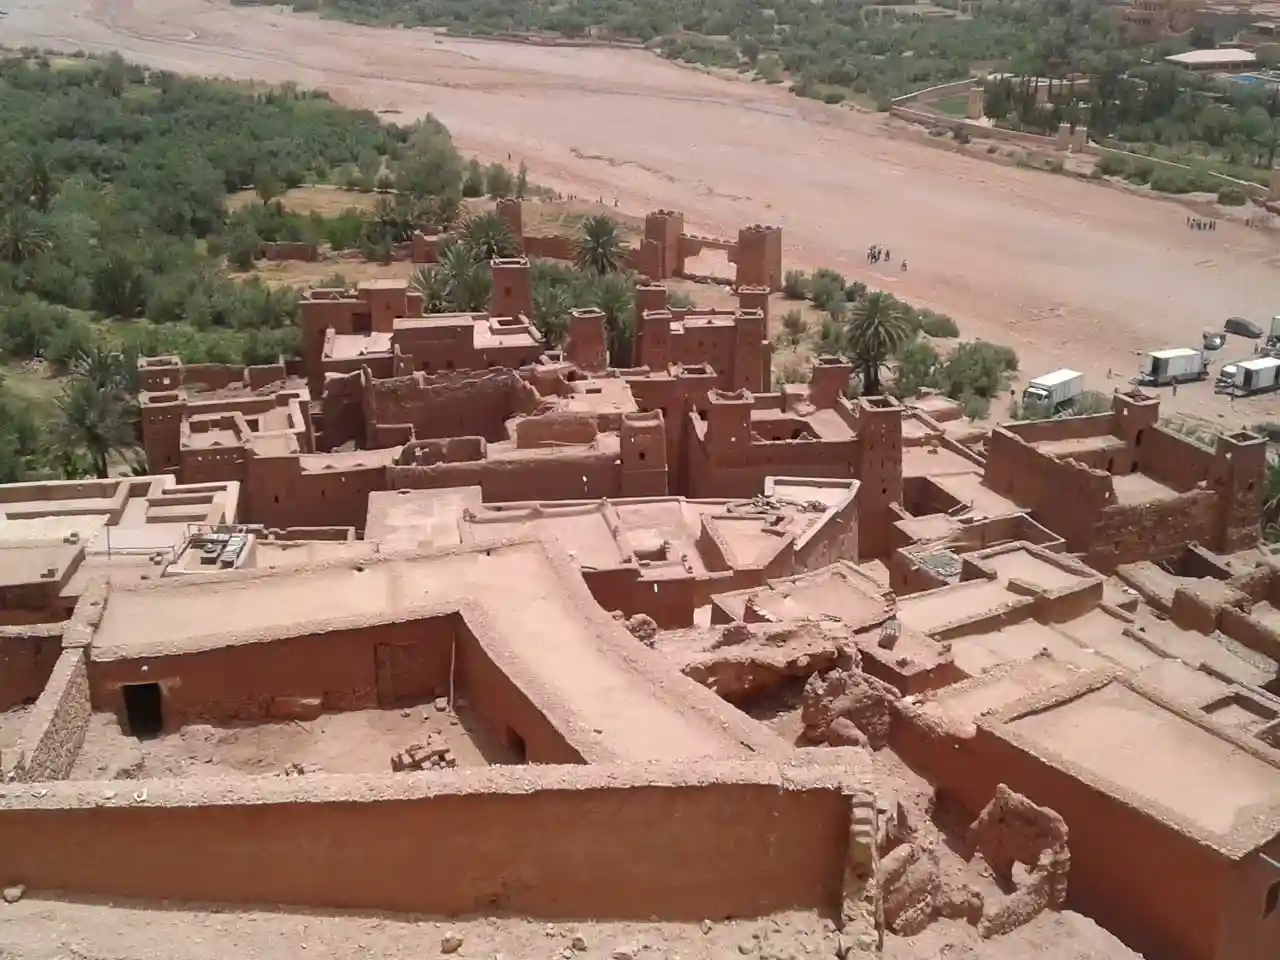  Ait Ben Haddou with our day trip! Explore ancient kasbahs, soak in stunning desert views, and immerse yourself in Moroccan history. Book your adventure today!